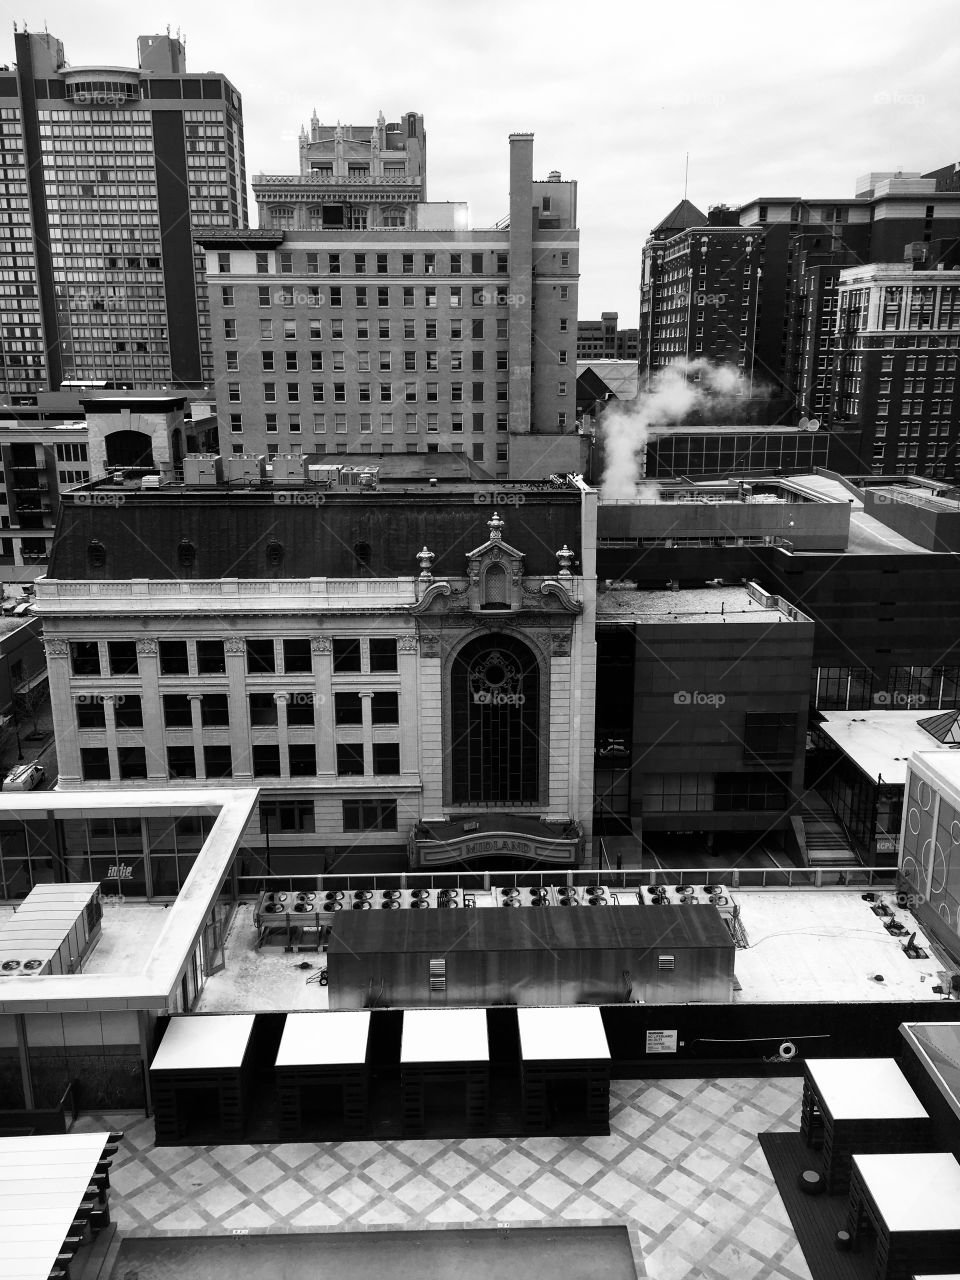 Mainland theater in downtown KC. Overlook of the city. Overcast, cool day. Has a Gotham look. 